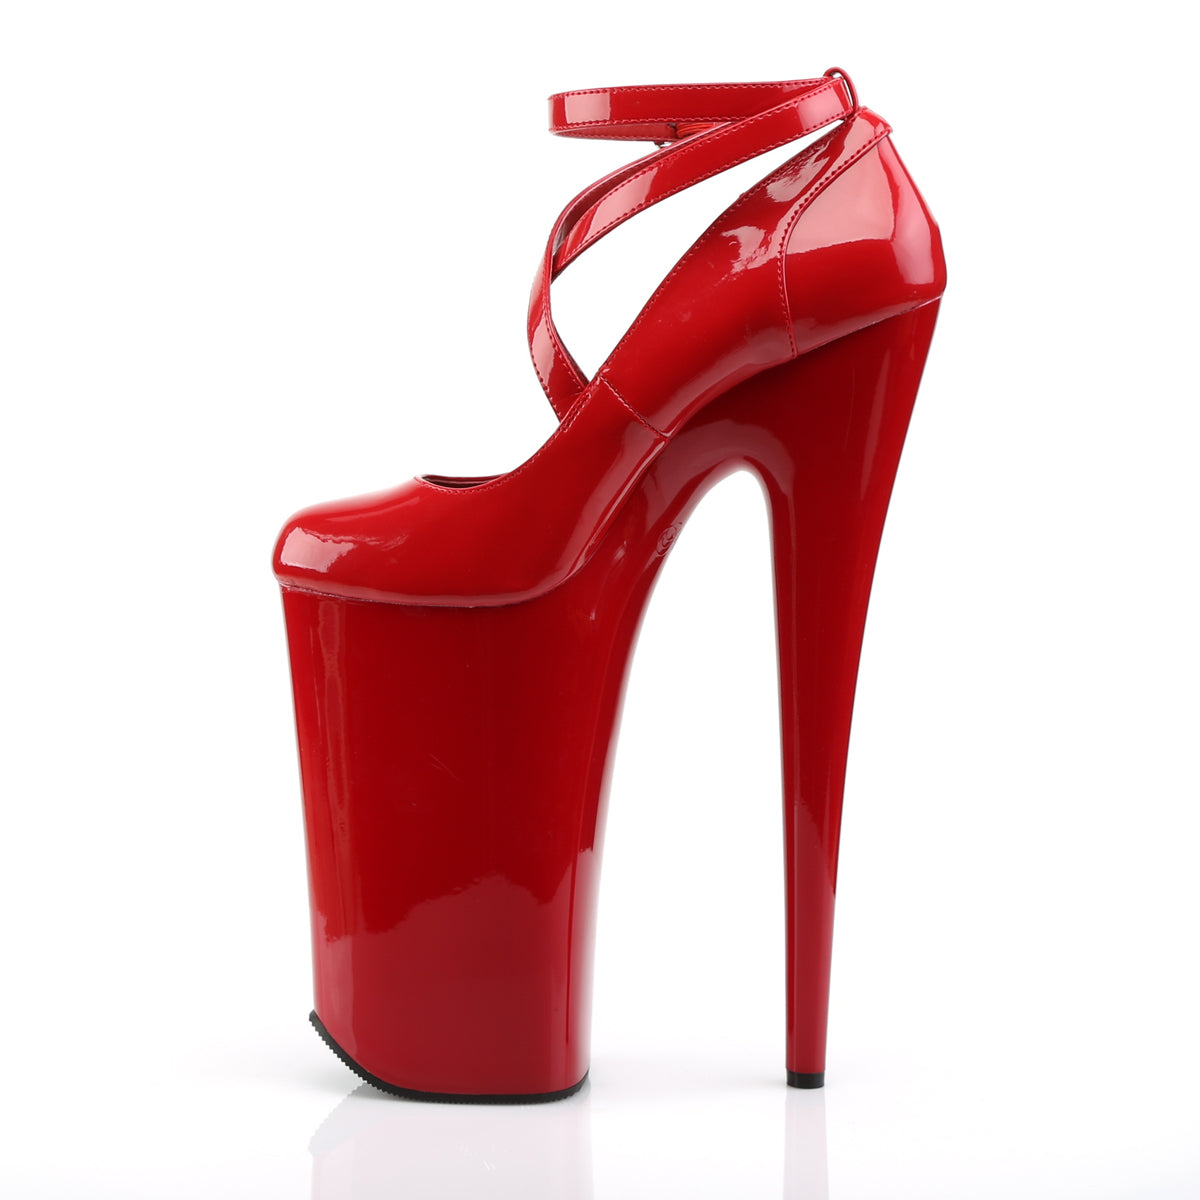 BEYOND-087 Pleaser Red/Red Platform Shoes [Extreme High Heels]